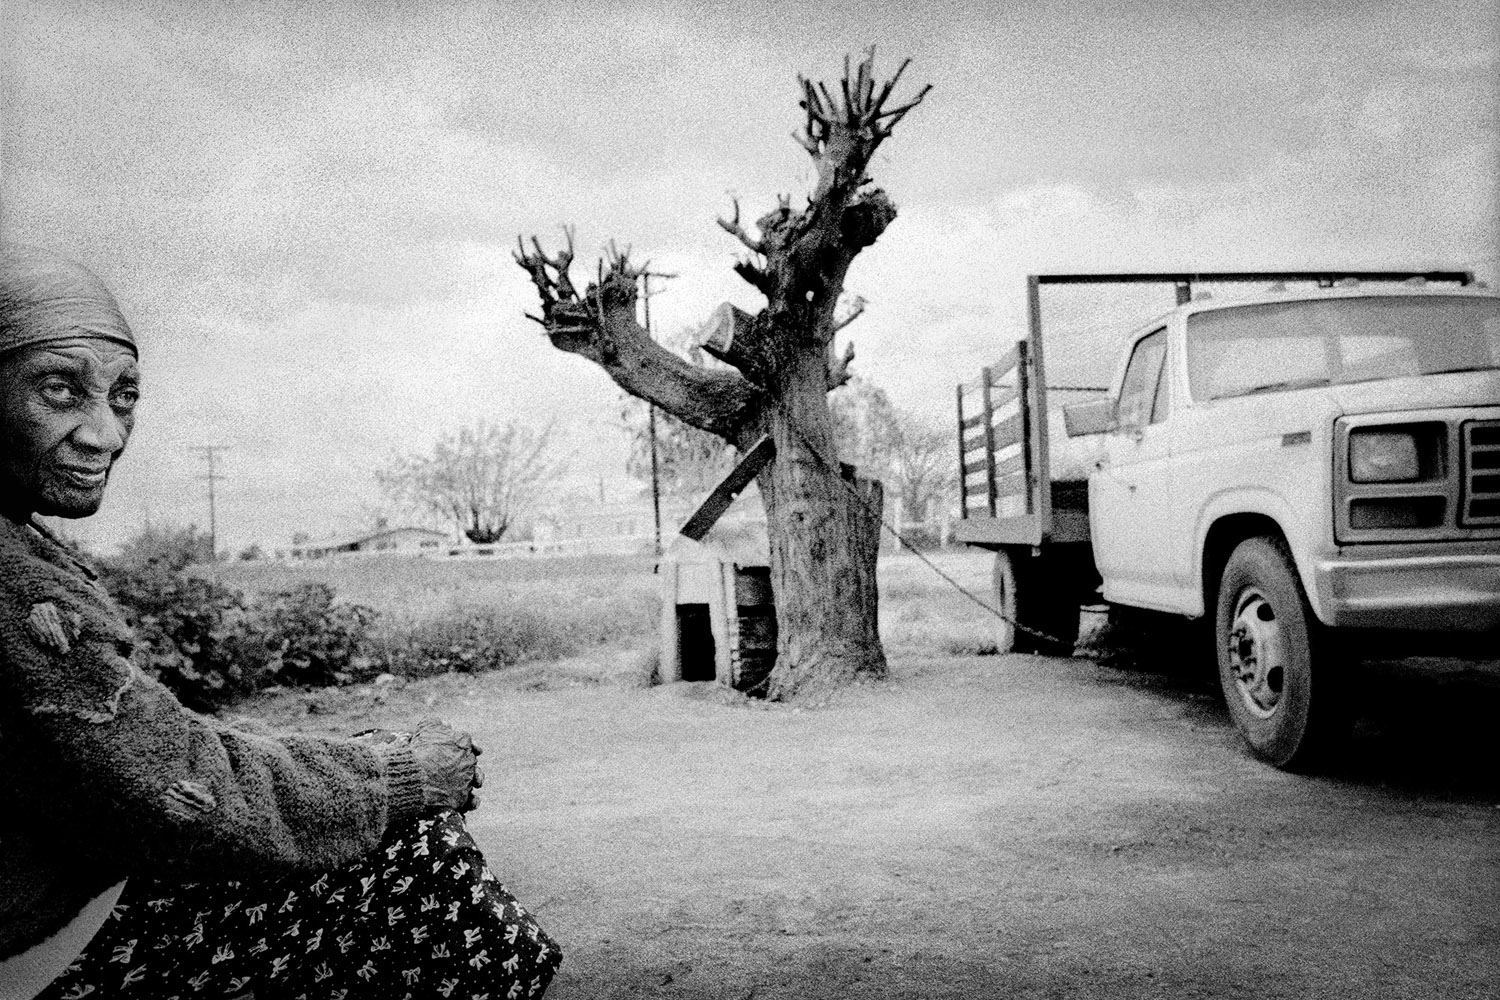 LightBox asked 25 alums to reflect on one important lesson they carry with them from the Eddie Adams Workshop
                              1988: Matt Black
                              Texas migrant in her yard. Teviston, Calif.
                              
                              I was an 18 year-old kid from the sticks who had discovered photography a couple of years before. It seemed like a chance at a little adventure. But those few days in upstate New York were when I started to realize that photography could be something else, something more. Eddie Adams, and the people he brought to the workshop, valued substance and convictions. They spoke of commitment. They believed photographs had great power. I brought that good advice with me right back to the sticks.